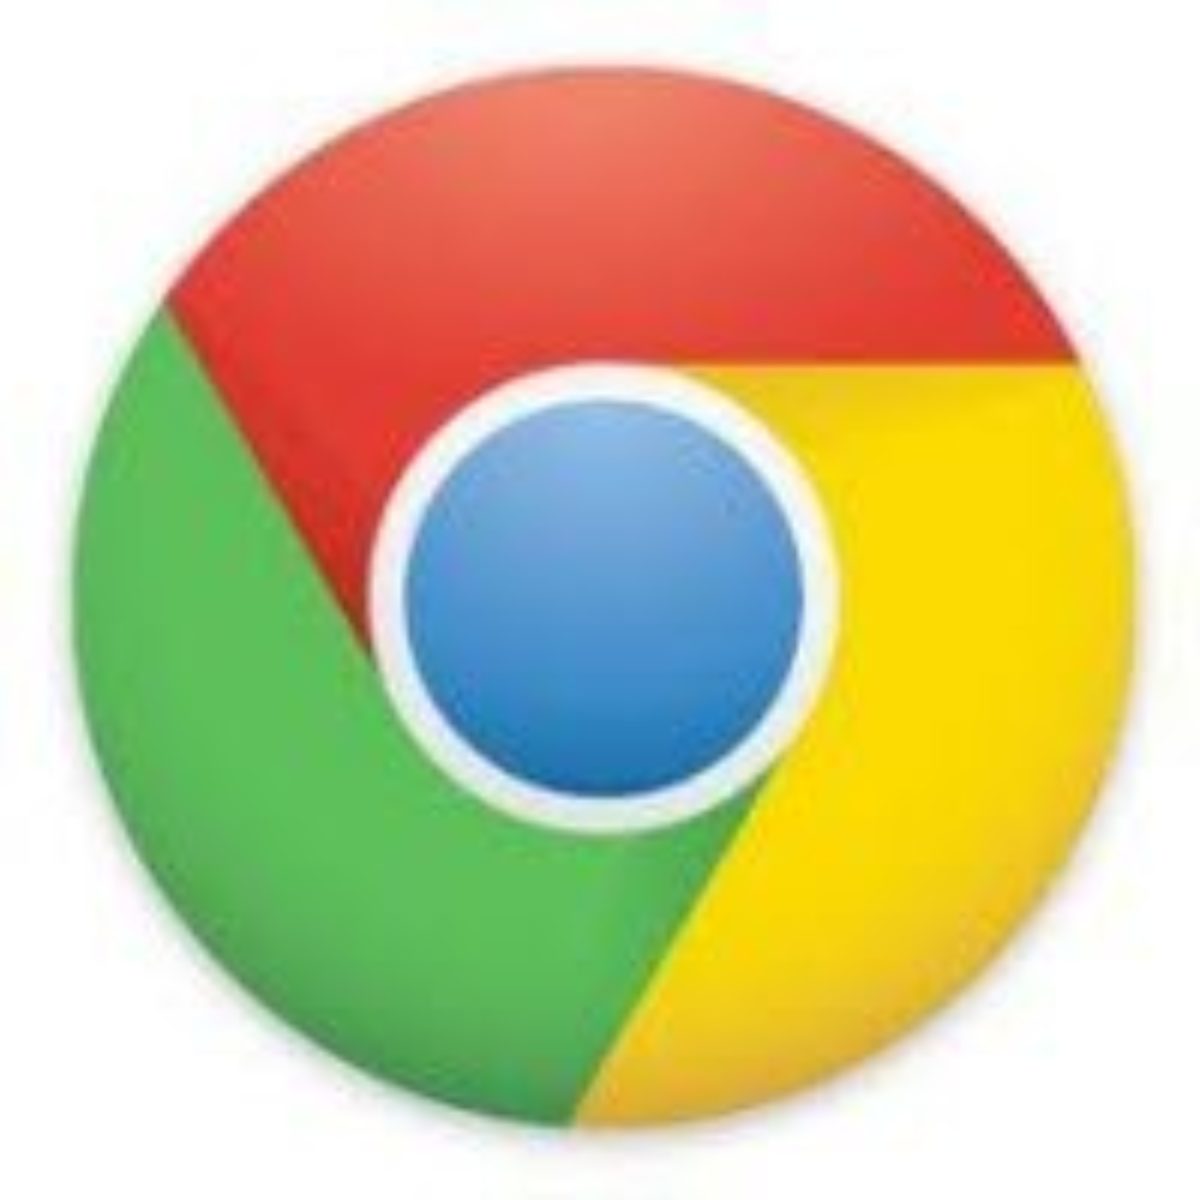 Google Chrome will stop you from submitting info on insecure web forms -  MSPoweruser